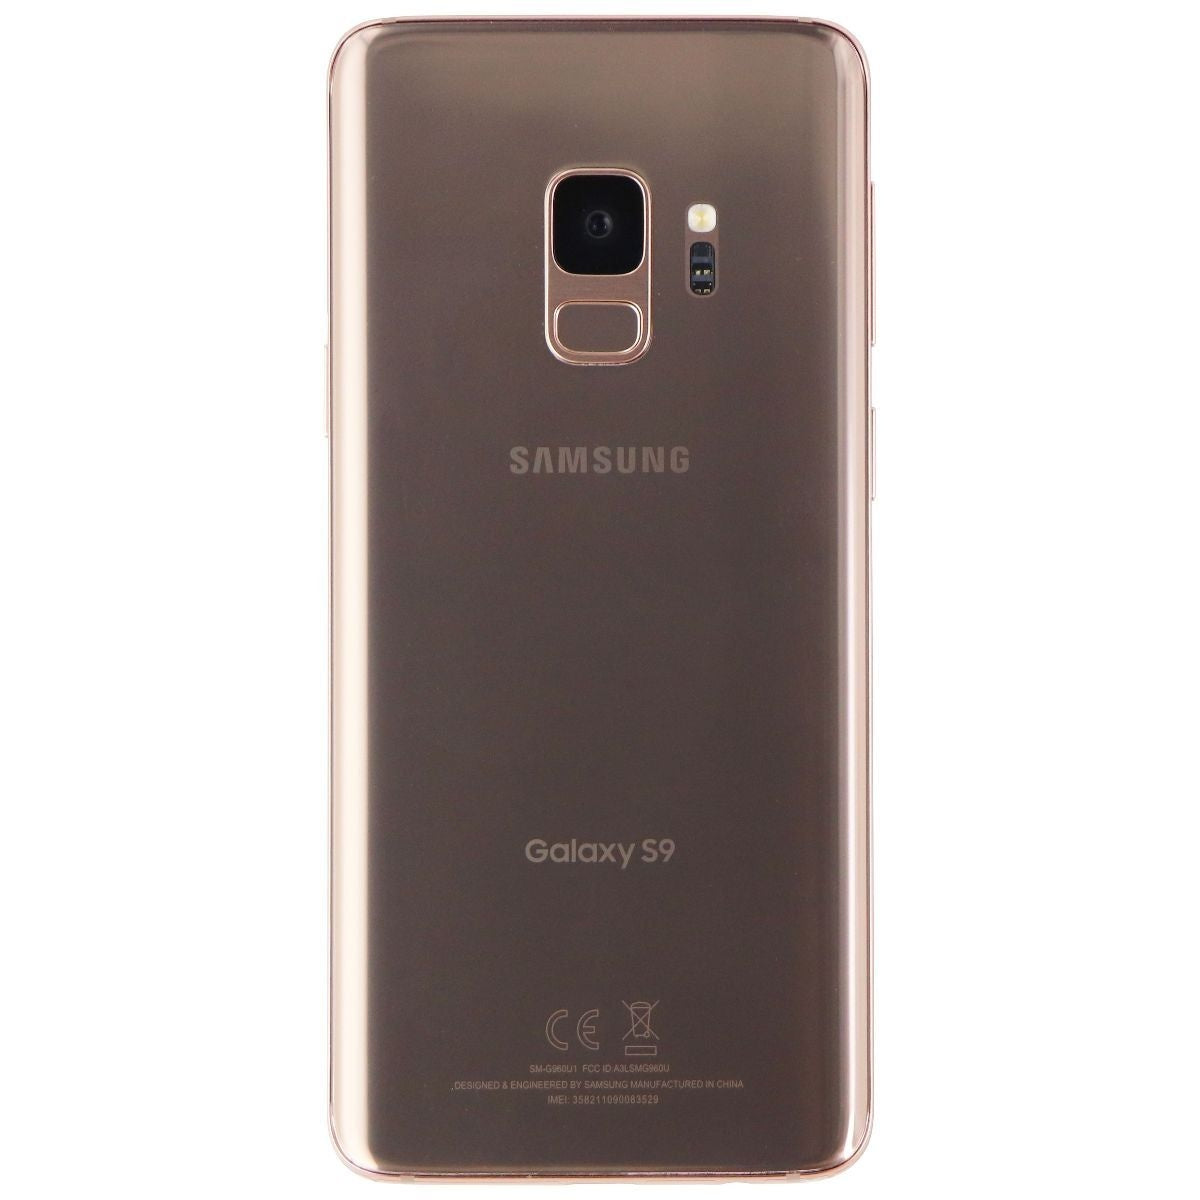 Samsung Galaxy S9 (5.8-in) Smartphone (SM-G960U1) Unlocked - 64GB/Sunrise Gold Cell Phones & Smartphones Samsung    - Simple Cell Bulk Wholesale Pricing - USA Seller